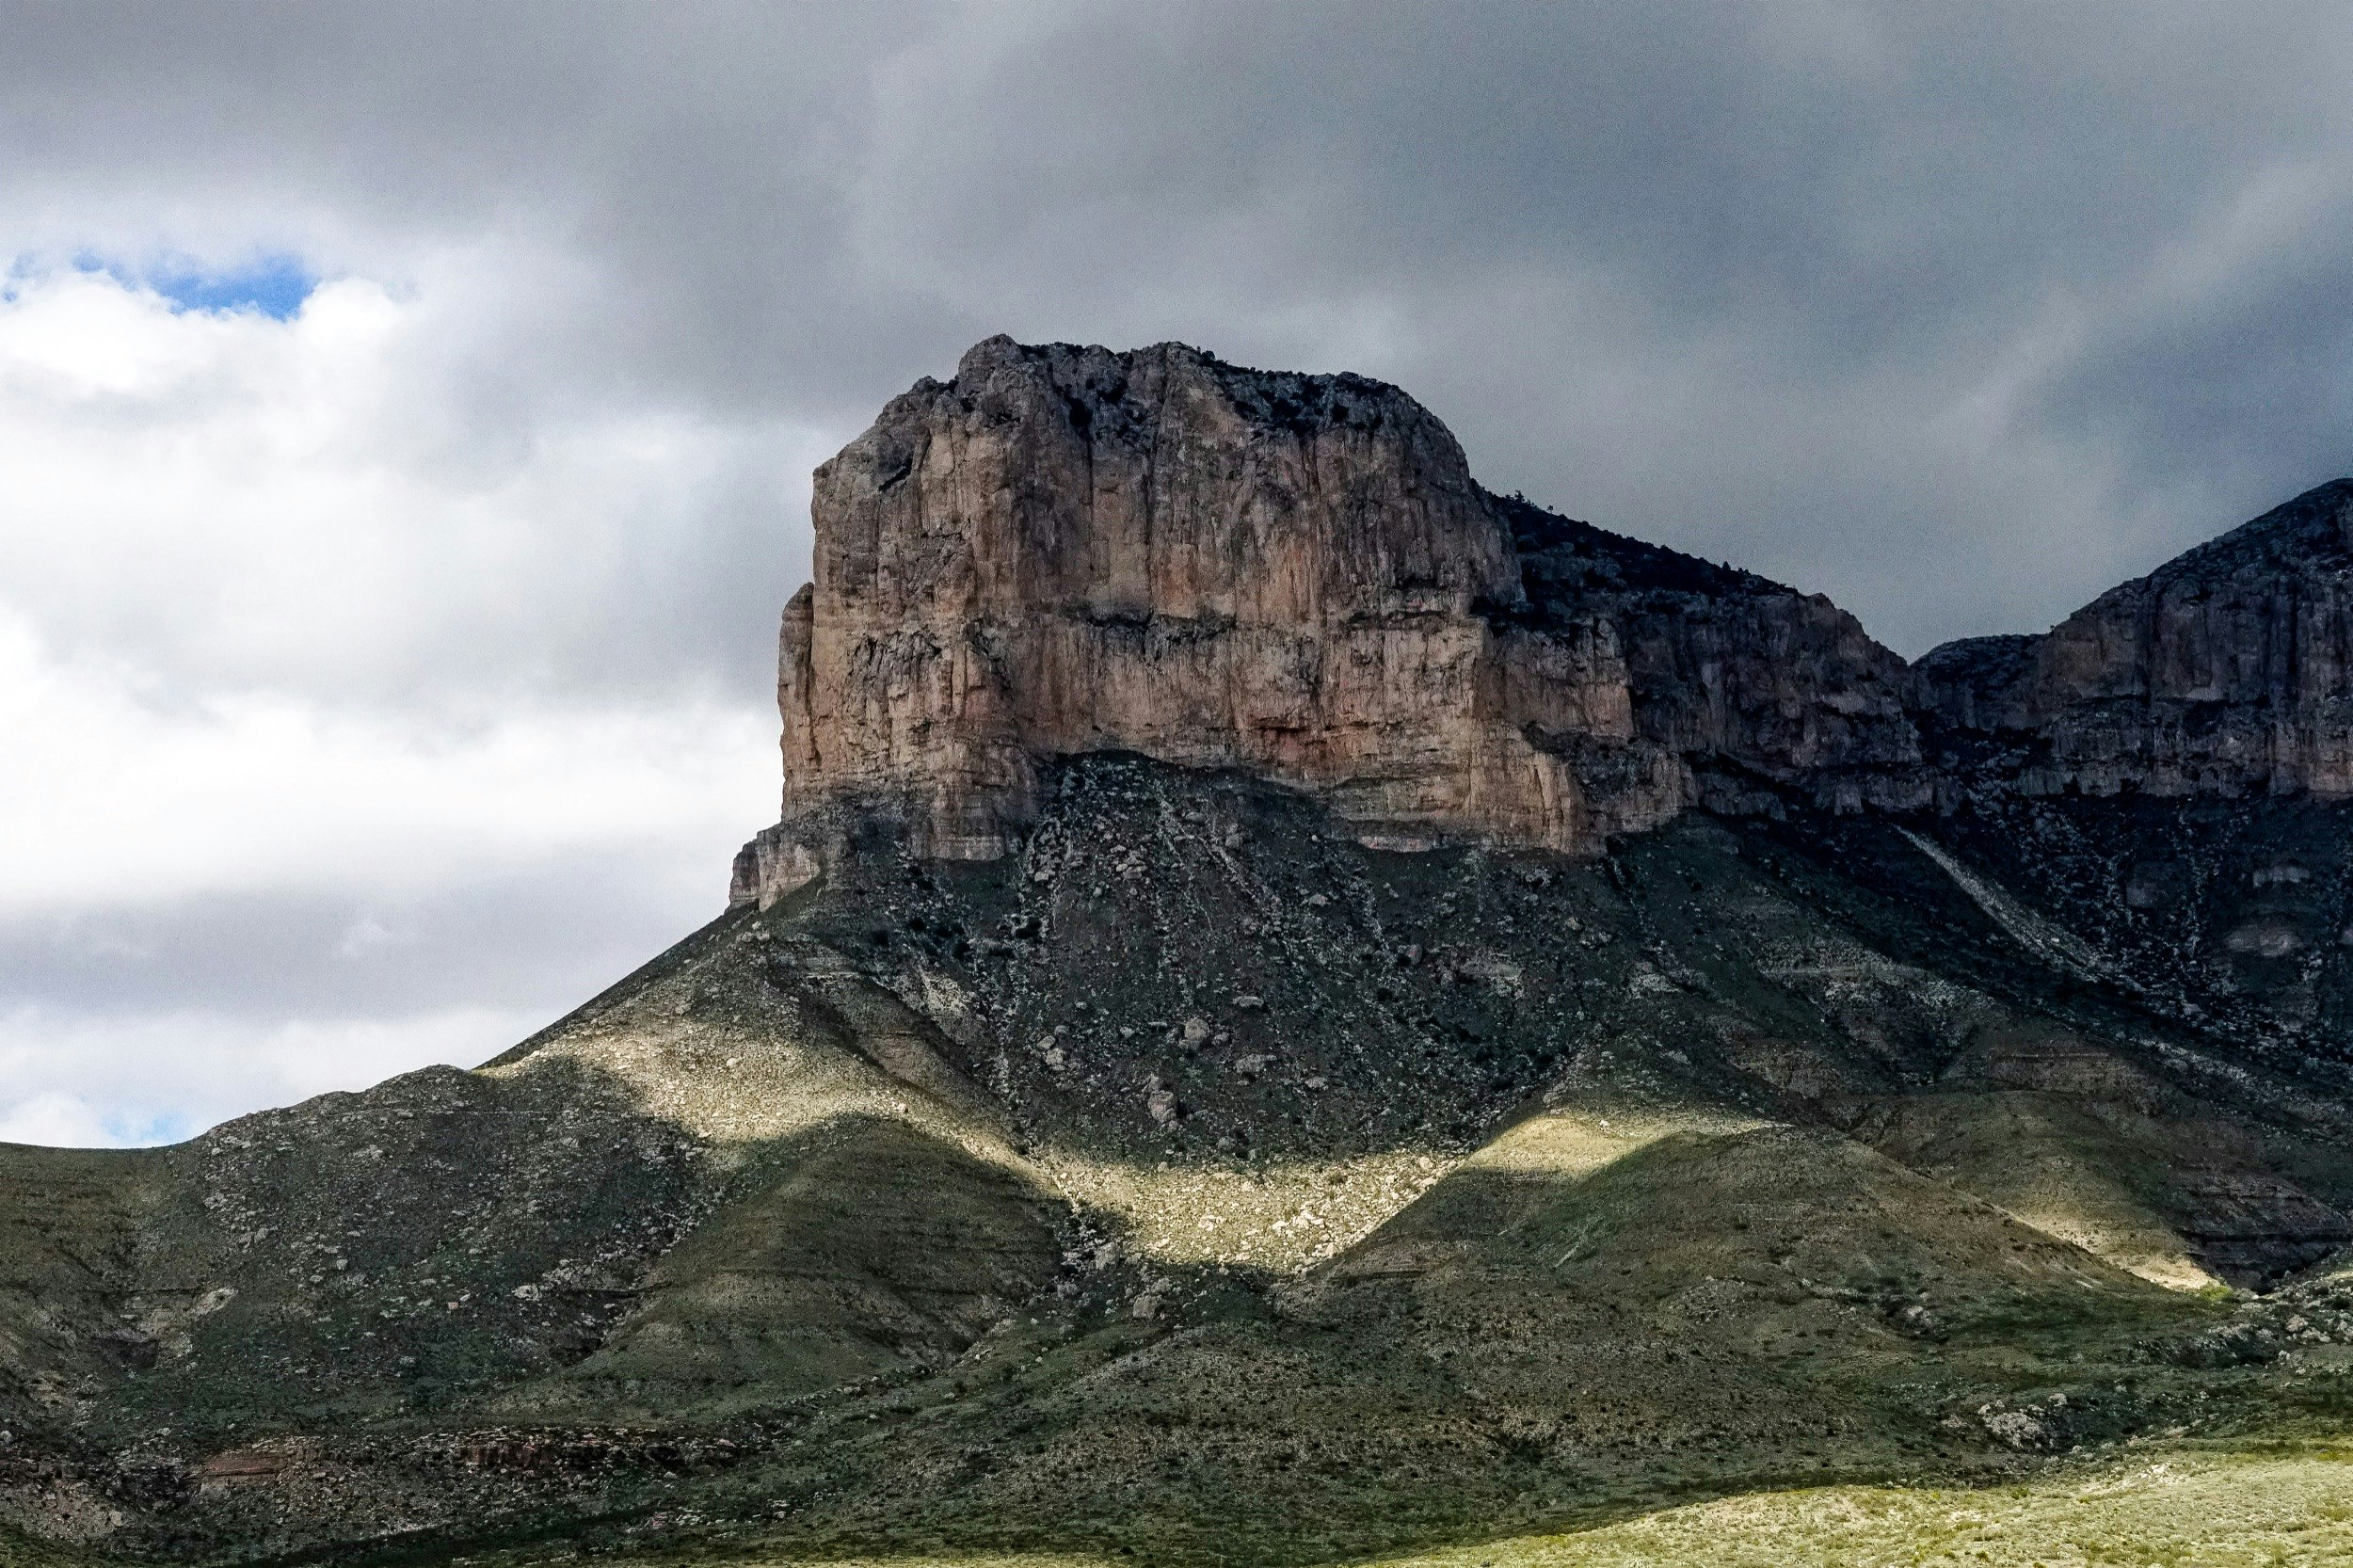 A mesa rises from lush surroundings in Guadeloupe Mountains National Park in Texas